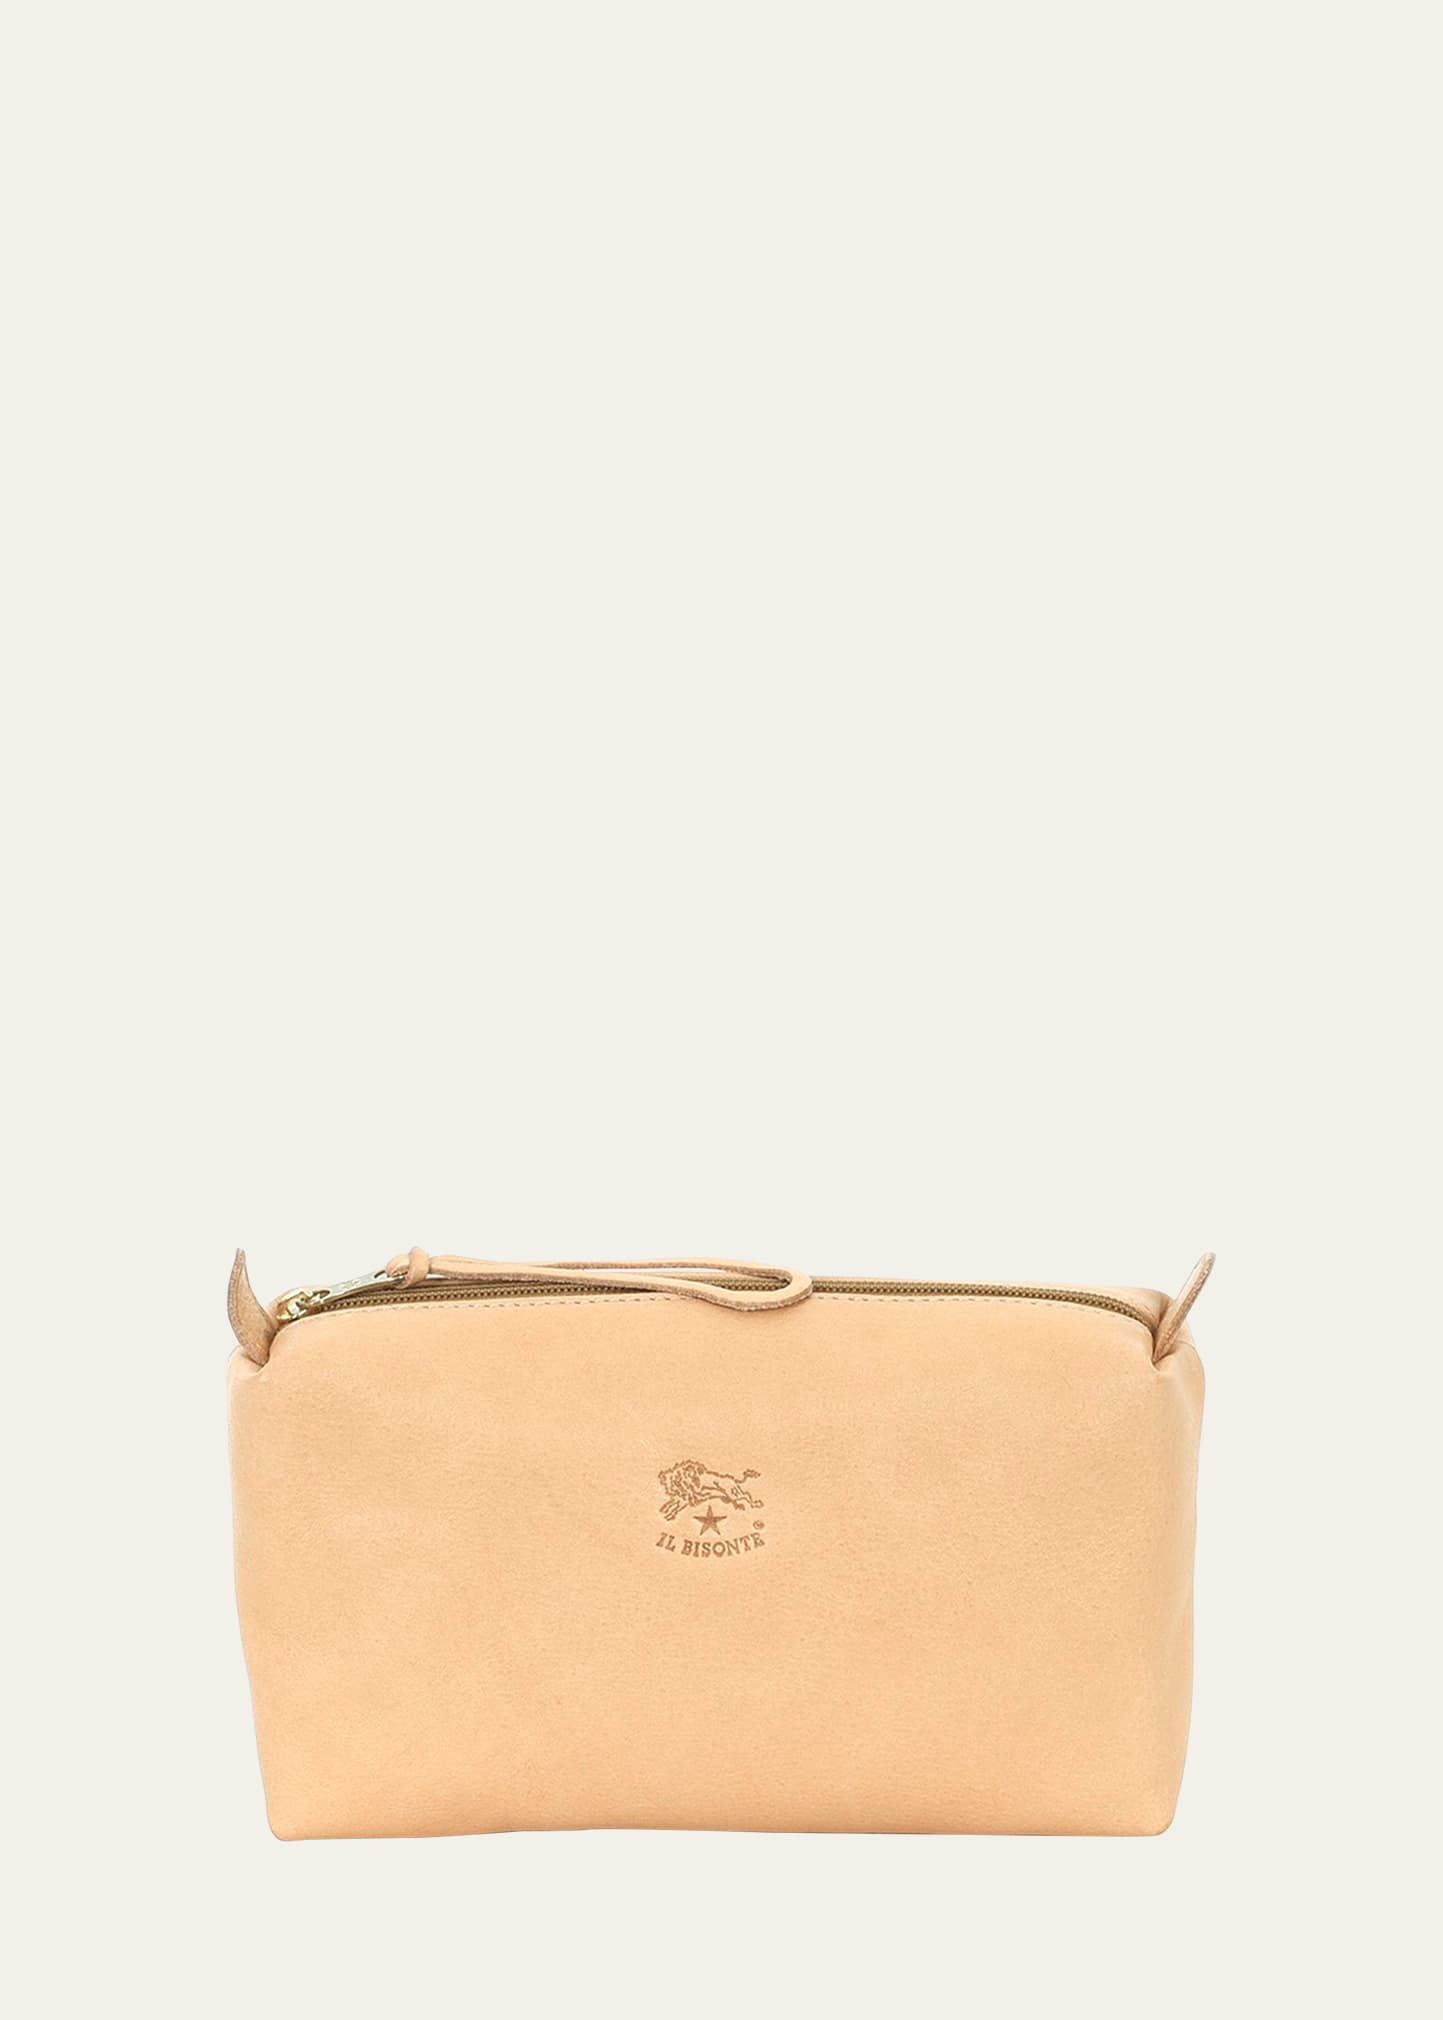 Il Bisonte Classic Zip Leather Clutch Bag In Pink